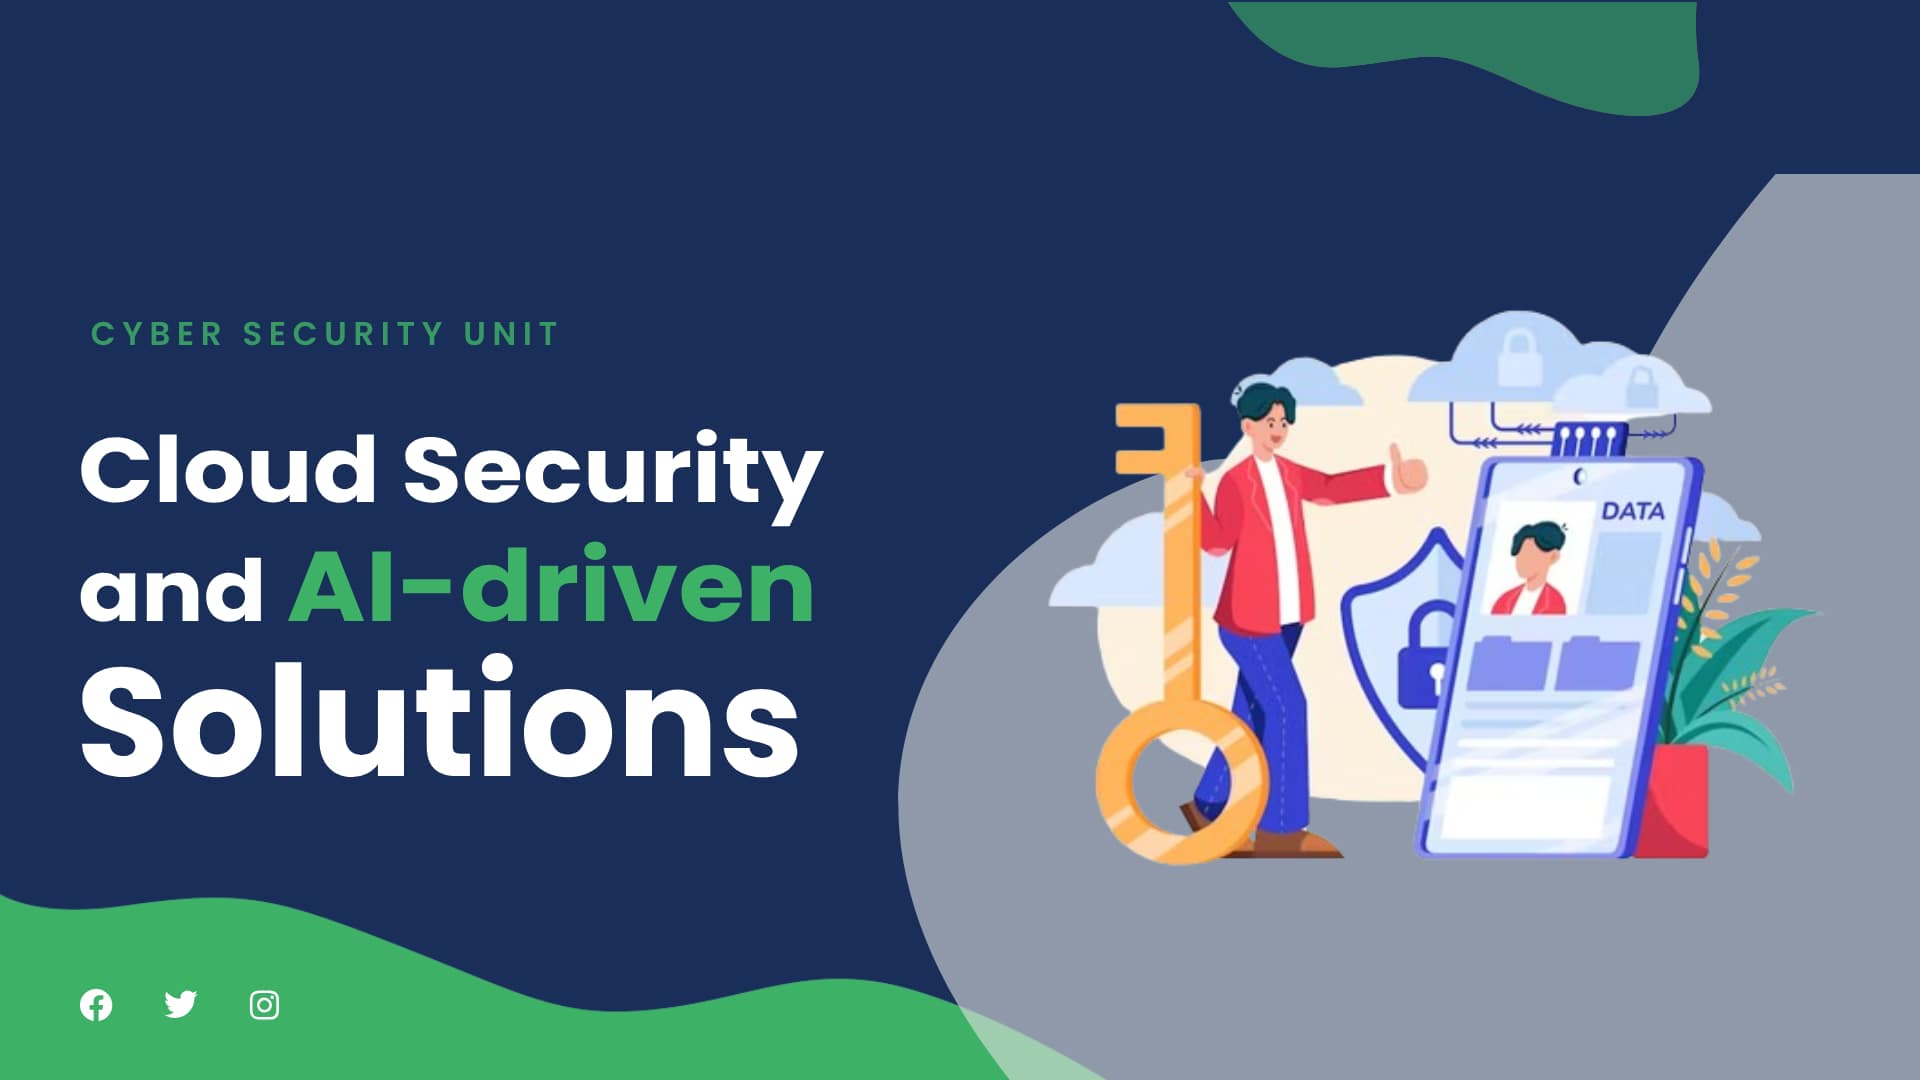 Cloud Security and AI-driven Solutions